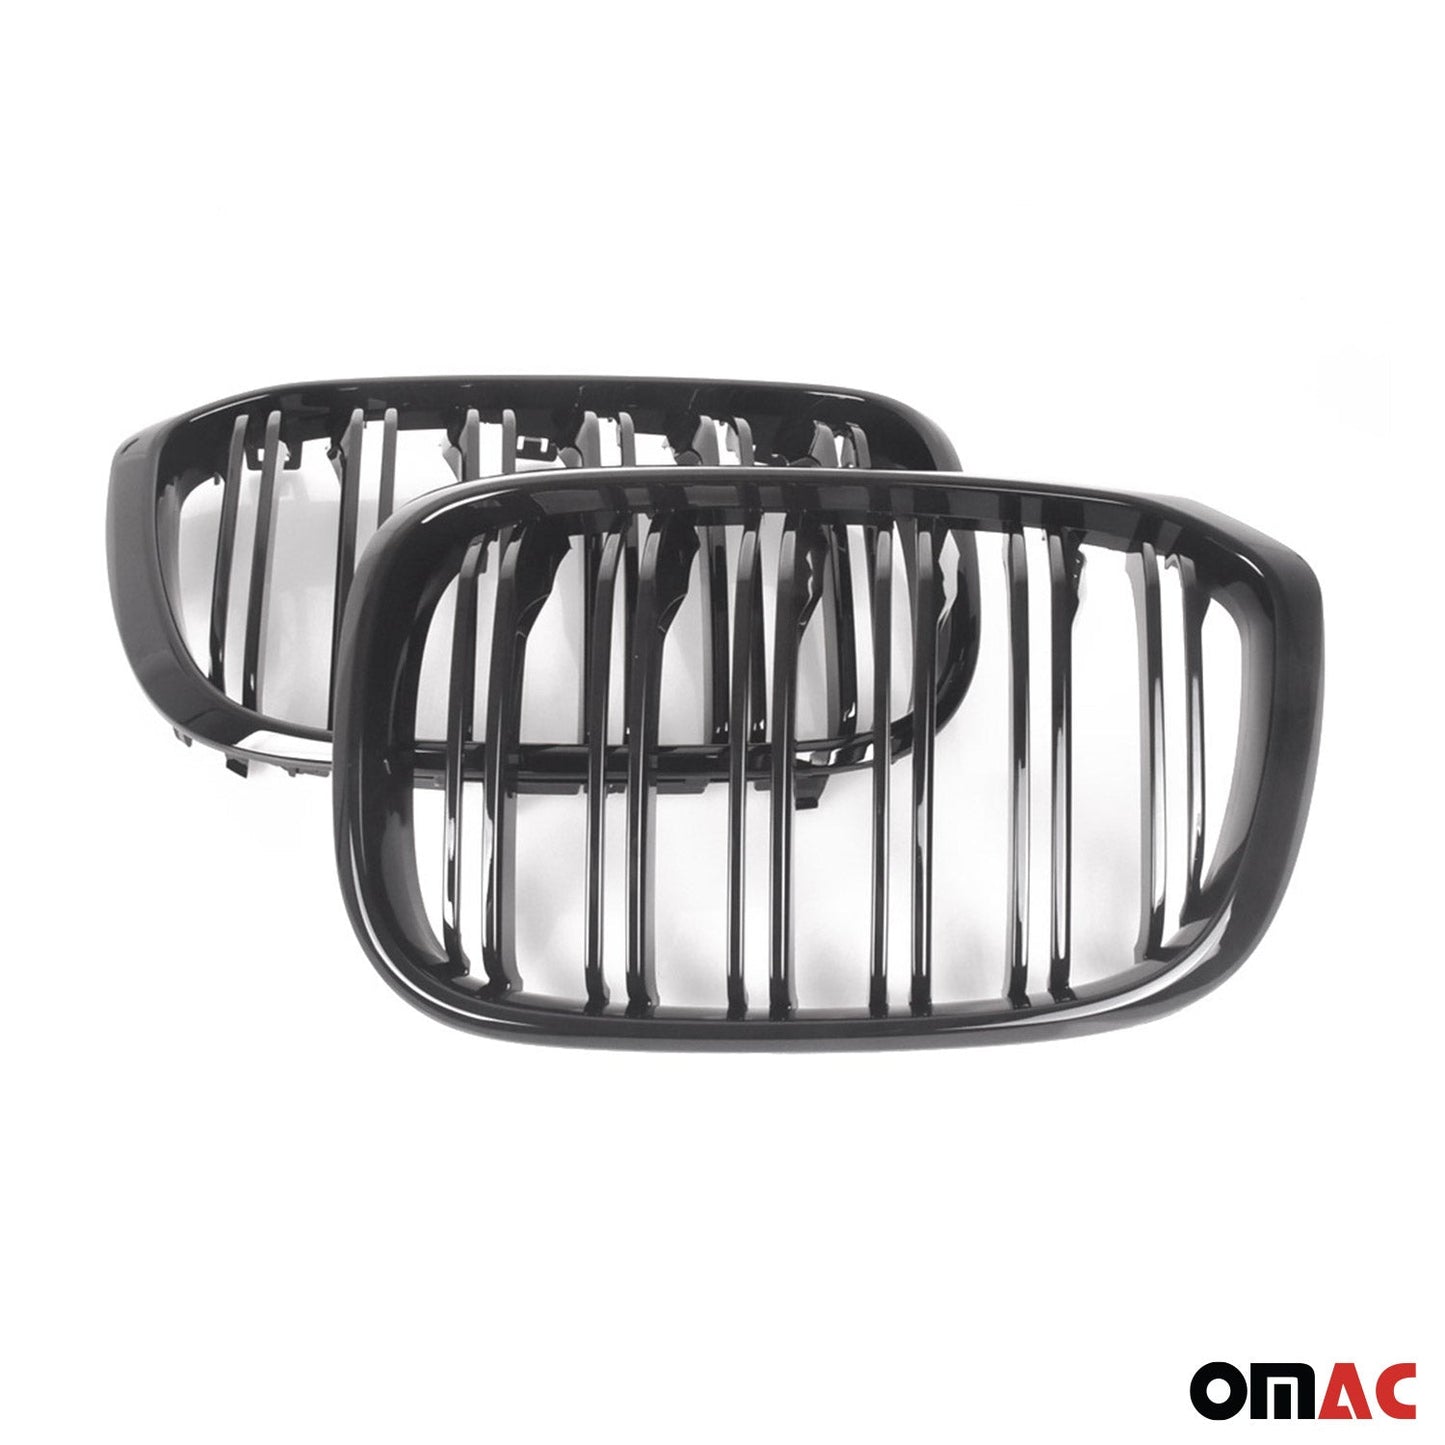 OMAC Front Kidney Grille Grill for BMW X4 G02 2018-2021 M Gloss Black 1240P081MPB